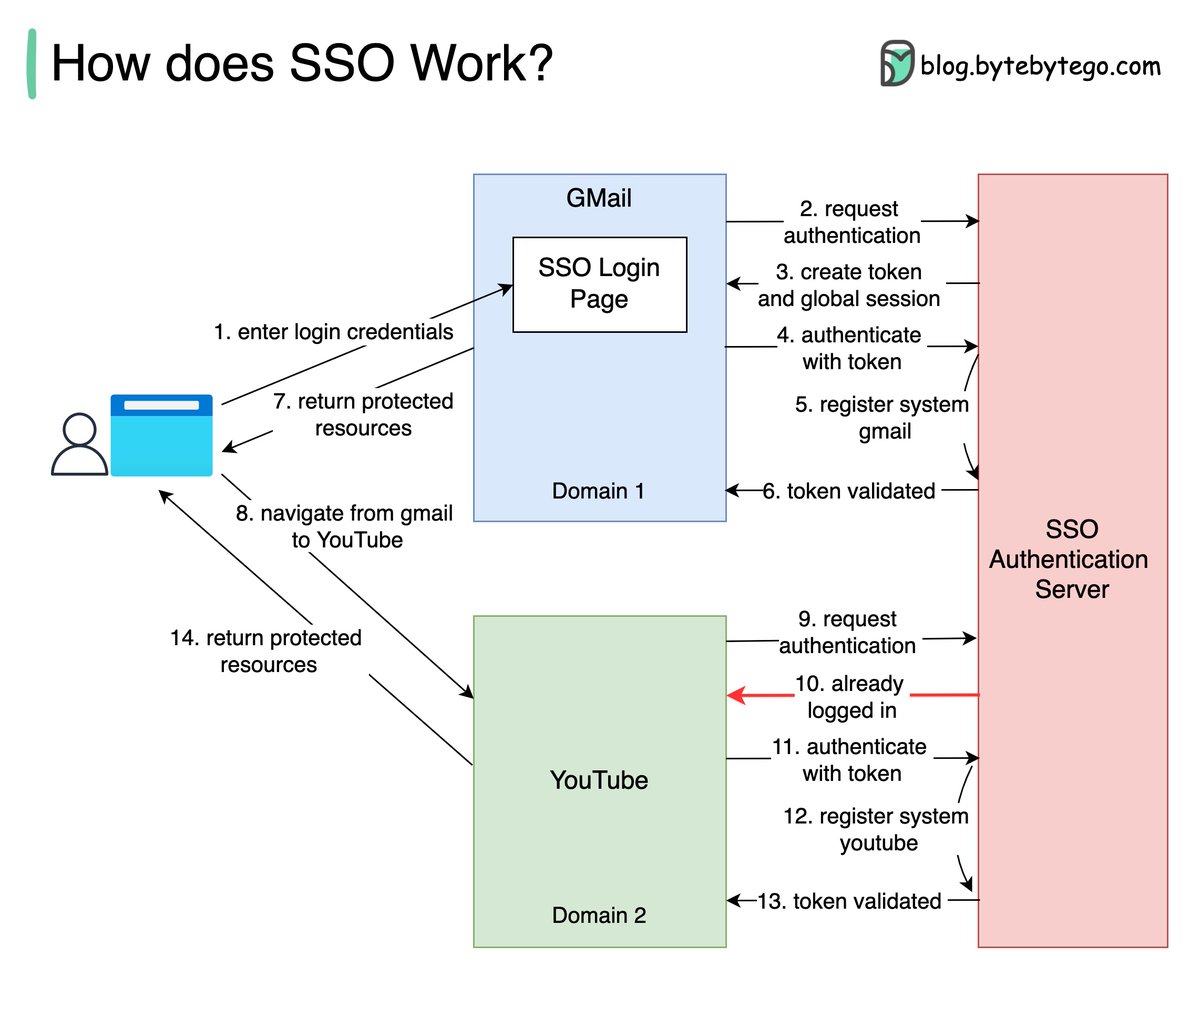 What is SSO (Single Sign-On)? Single Sign-On (SSO) is an authentication scheme. It allows a user to log in to different systems using a single ID. The diagram below illustrates how SSO works. Step 1: A user visits Gmail, or any email service. Gmail finds the user is not logged